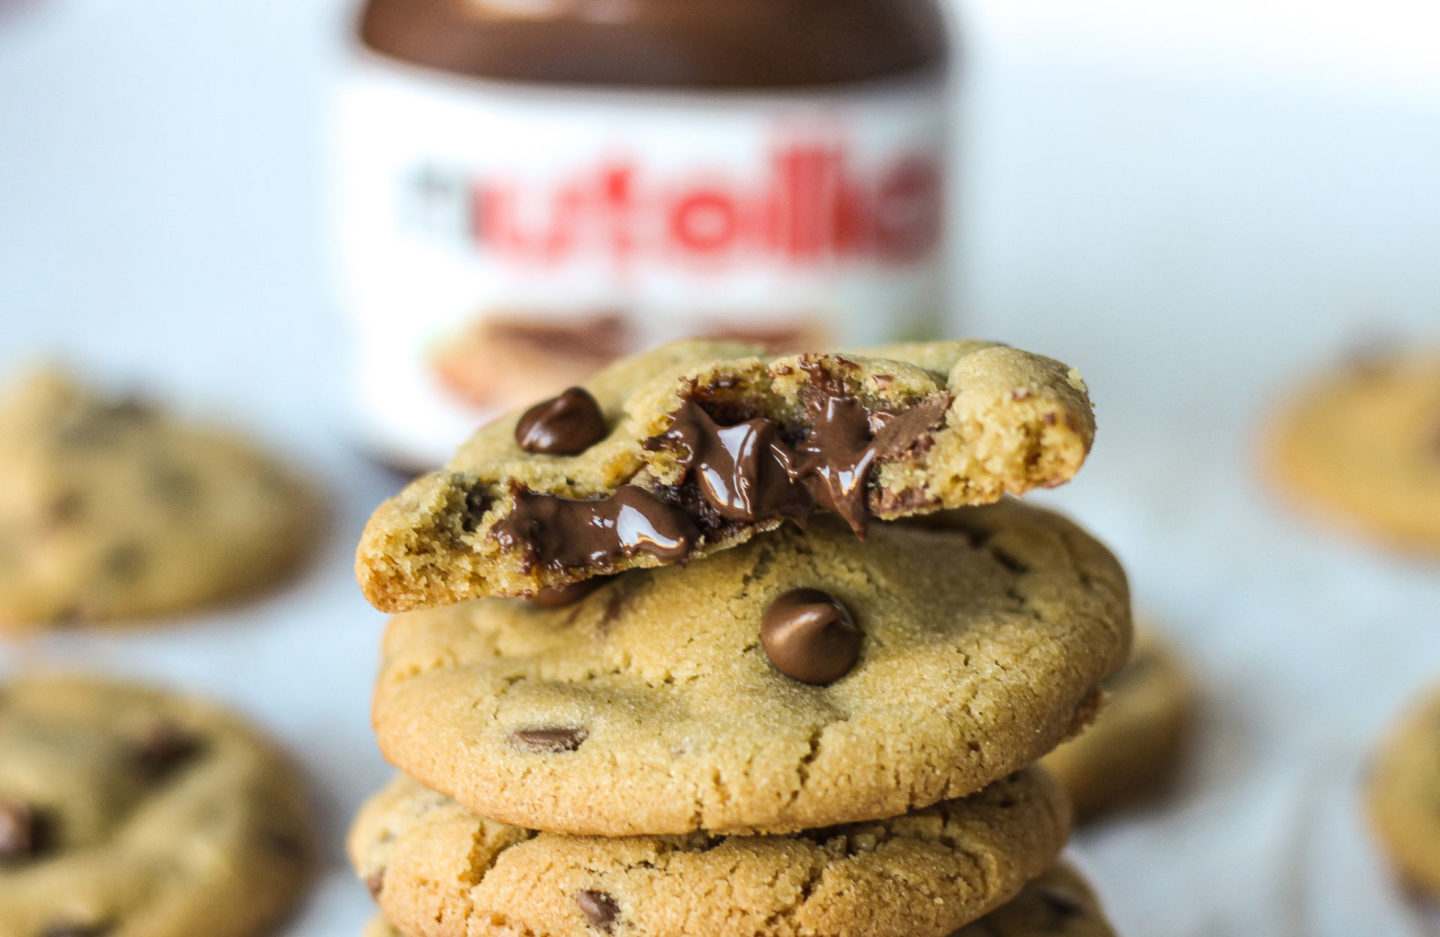 half a Nutella stuffed chocolate chip cookie showing melted Nutella inside, sat on top of tower of cookies with jar of Nutella in background